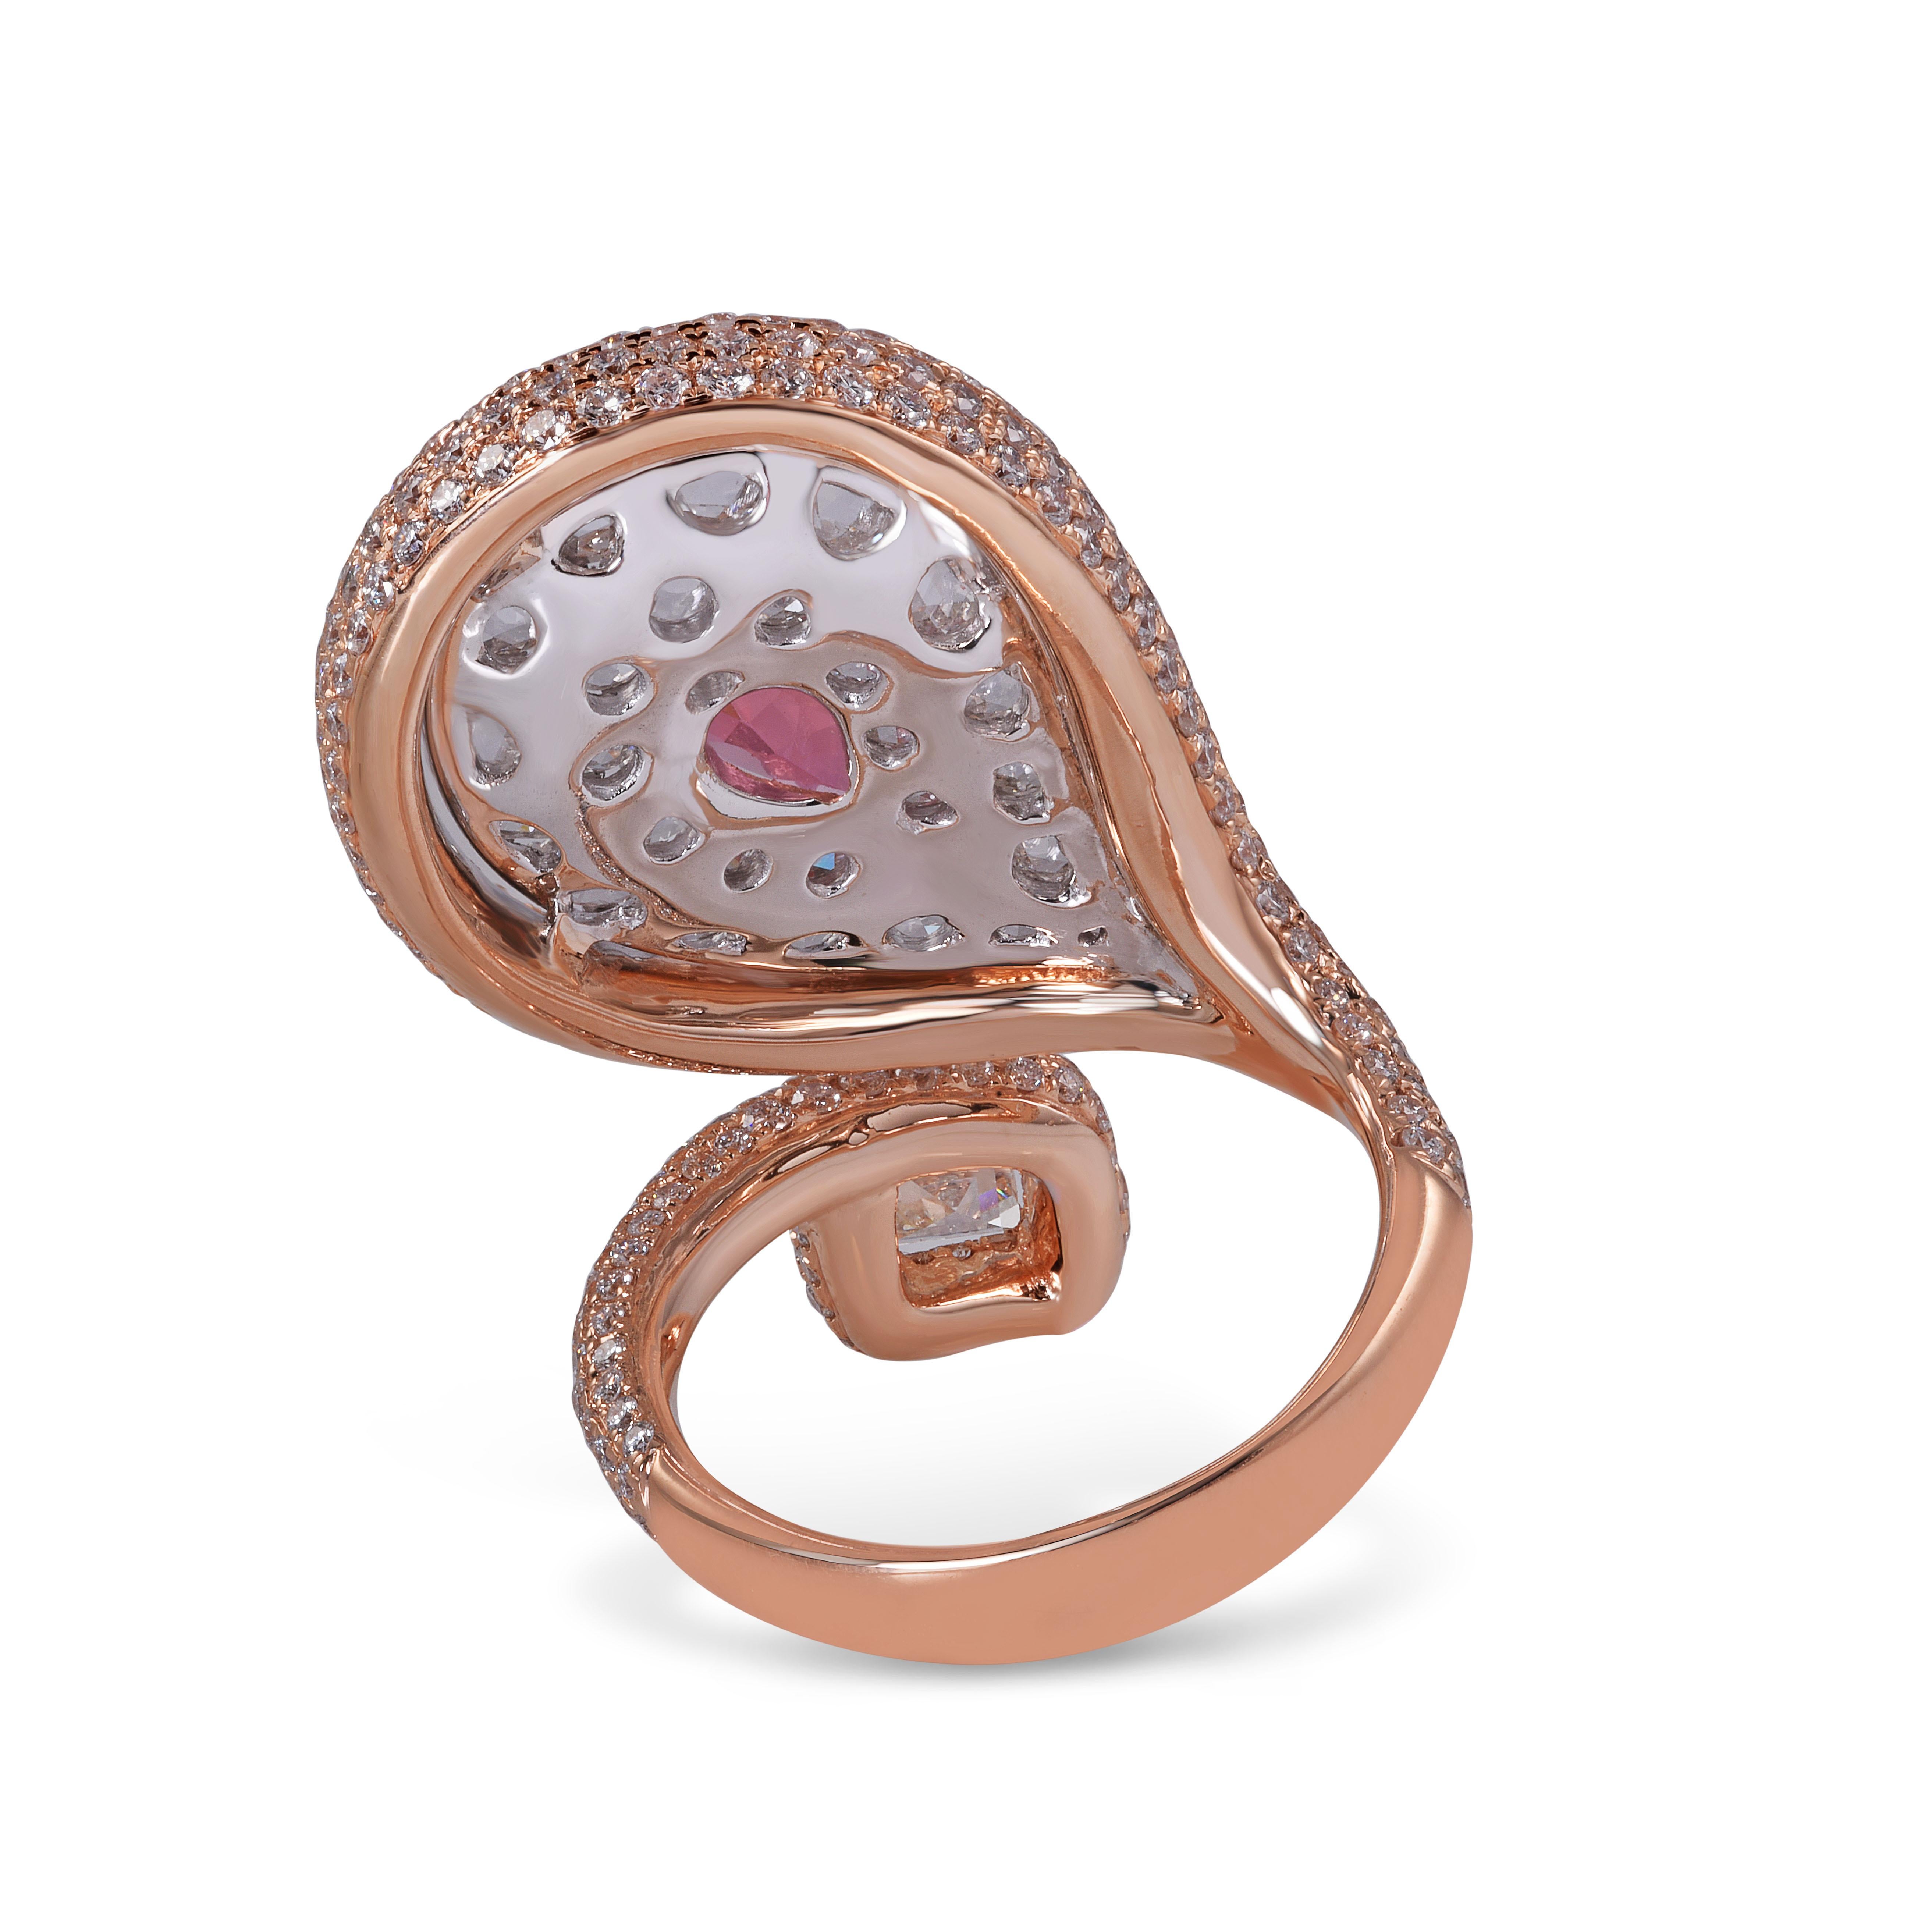 Combining the vivid pink hue of tourmaline with the unrivalled clarity of diamonds, this ring finds inspiration in the contrast of the natural world. 18k rose gold curves are draped in 324 micro pave brilliant-cut diamonds, culminating in a single